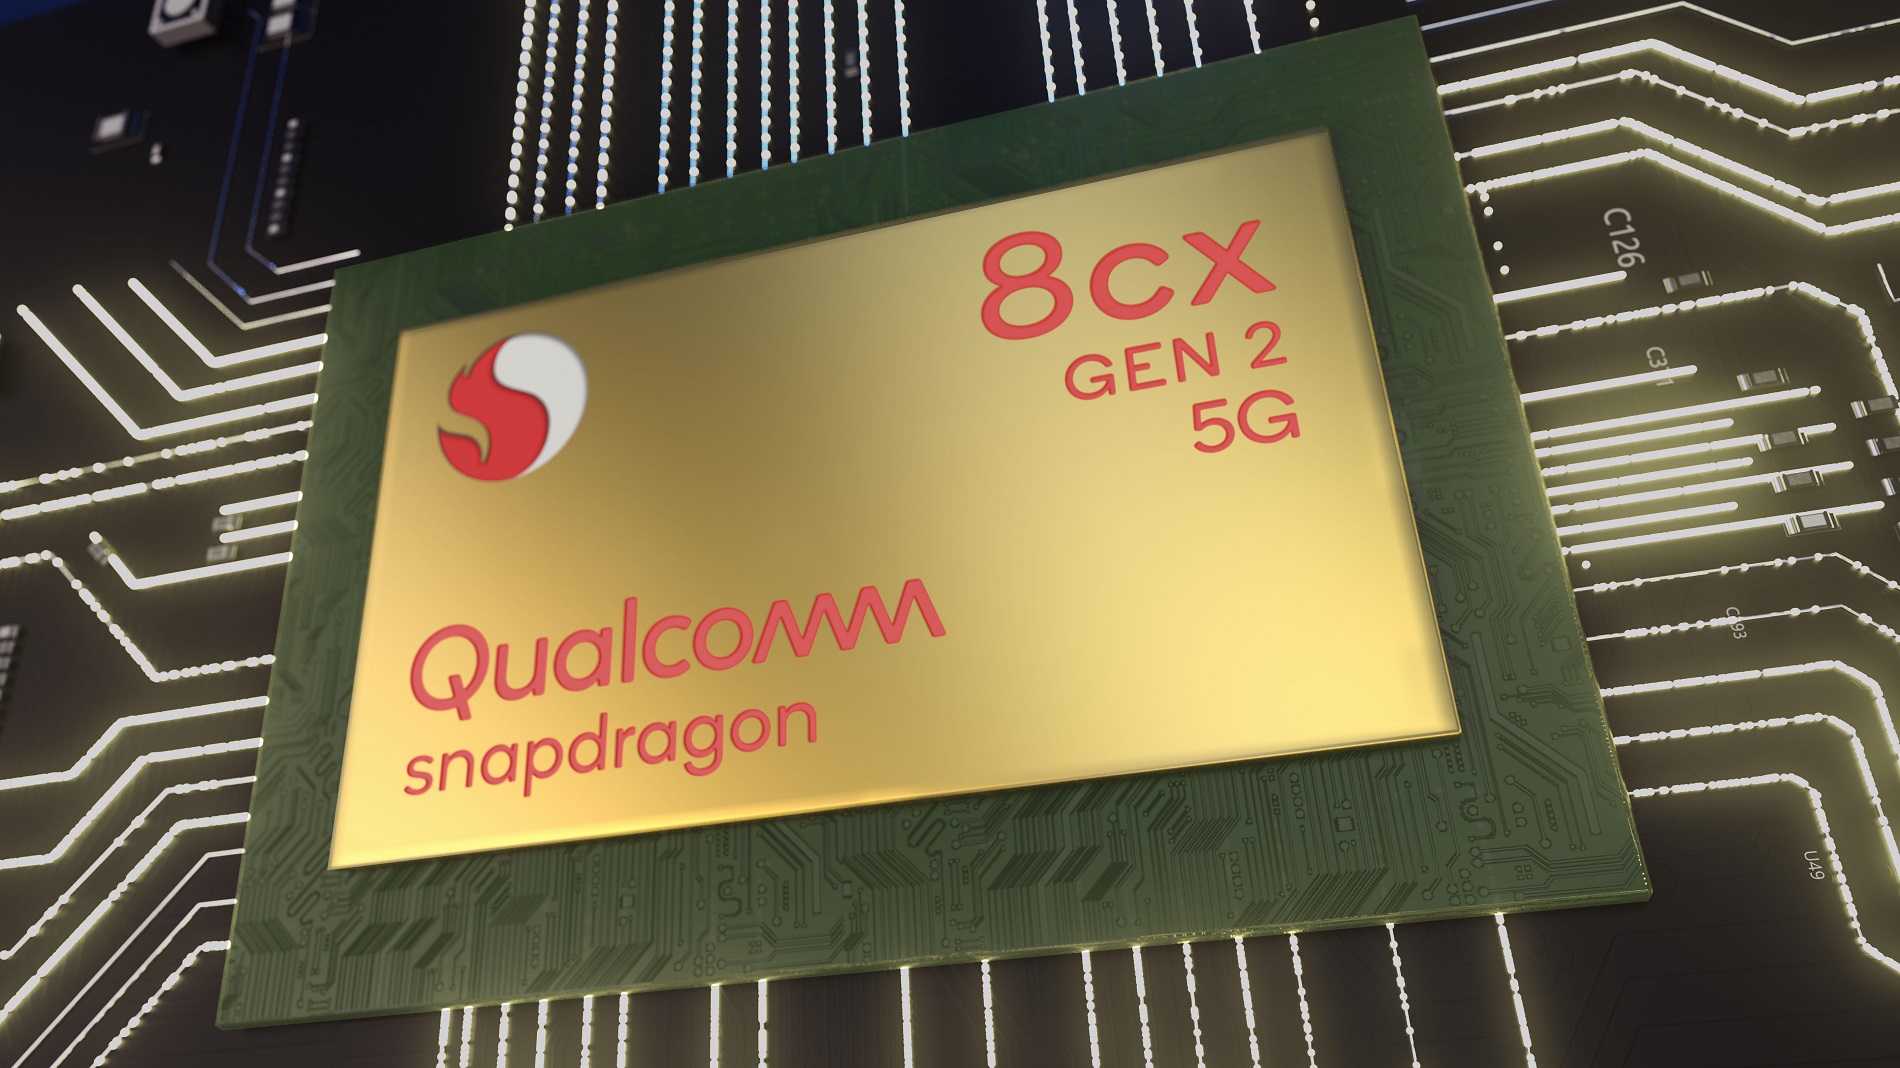 Qualcomm Snapdragon 8cx Gen 2 5G Processor - Benchmarks and Specs -  NotebookCheck.net Tech